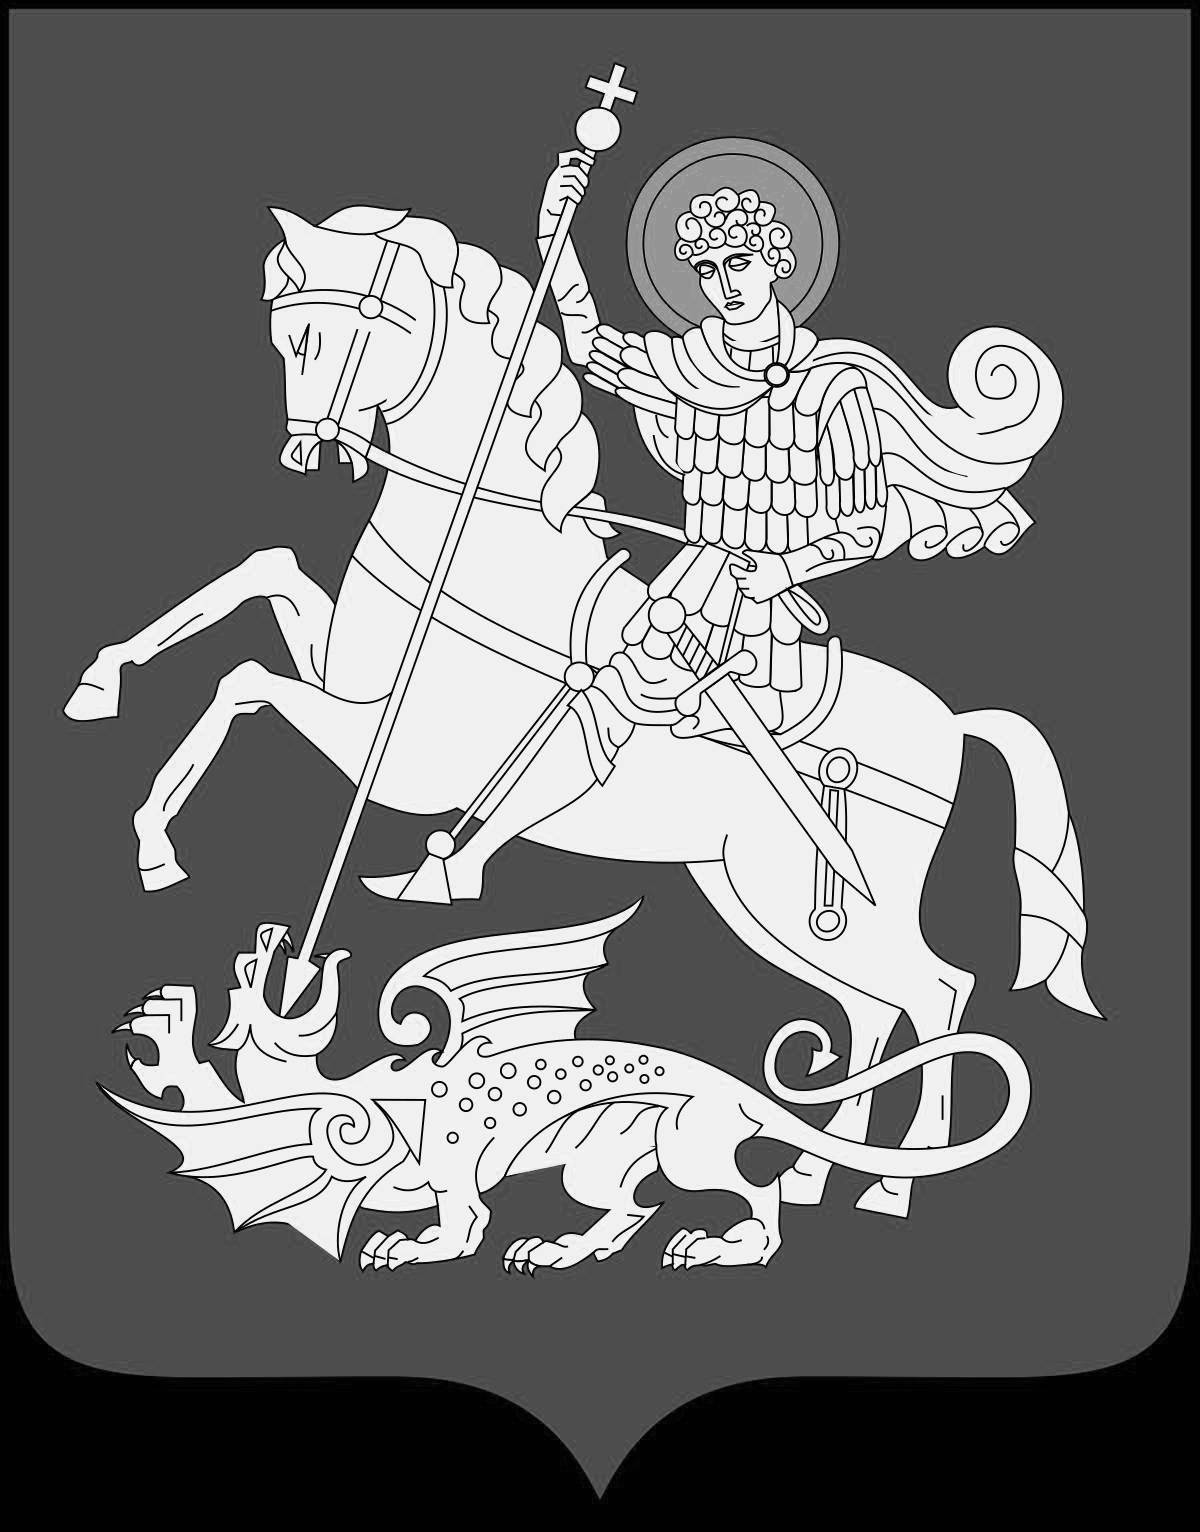 Impressive coat of arms of moscow for children